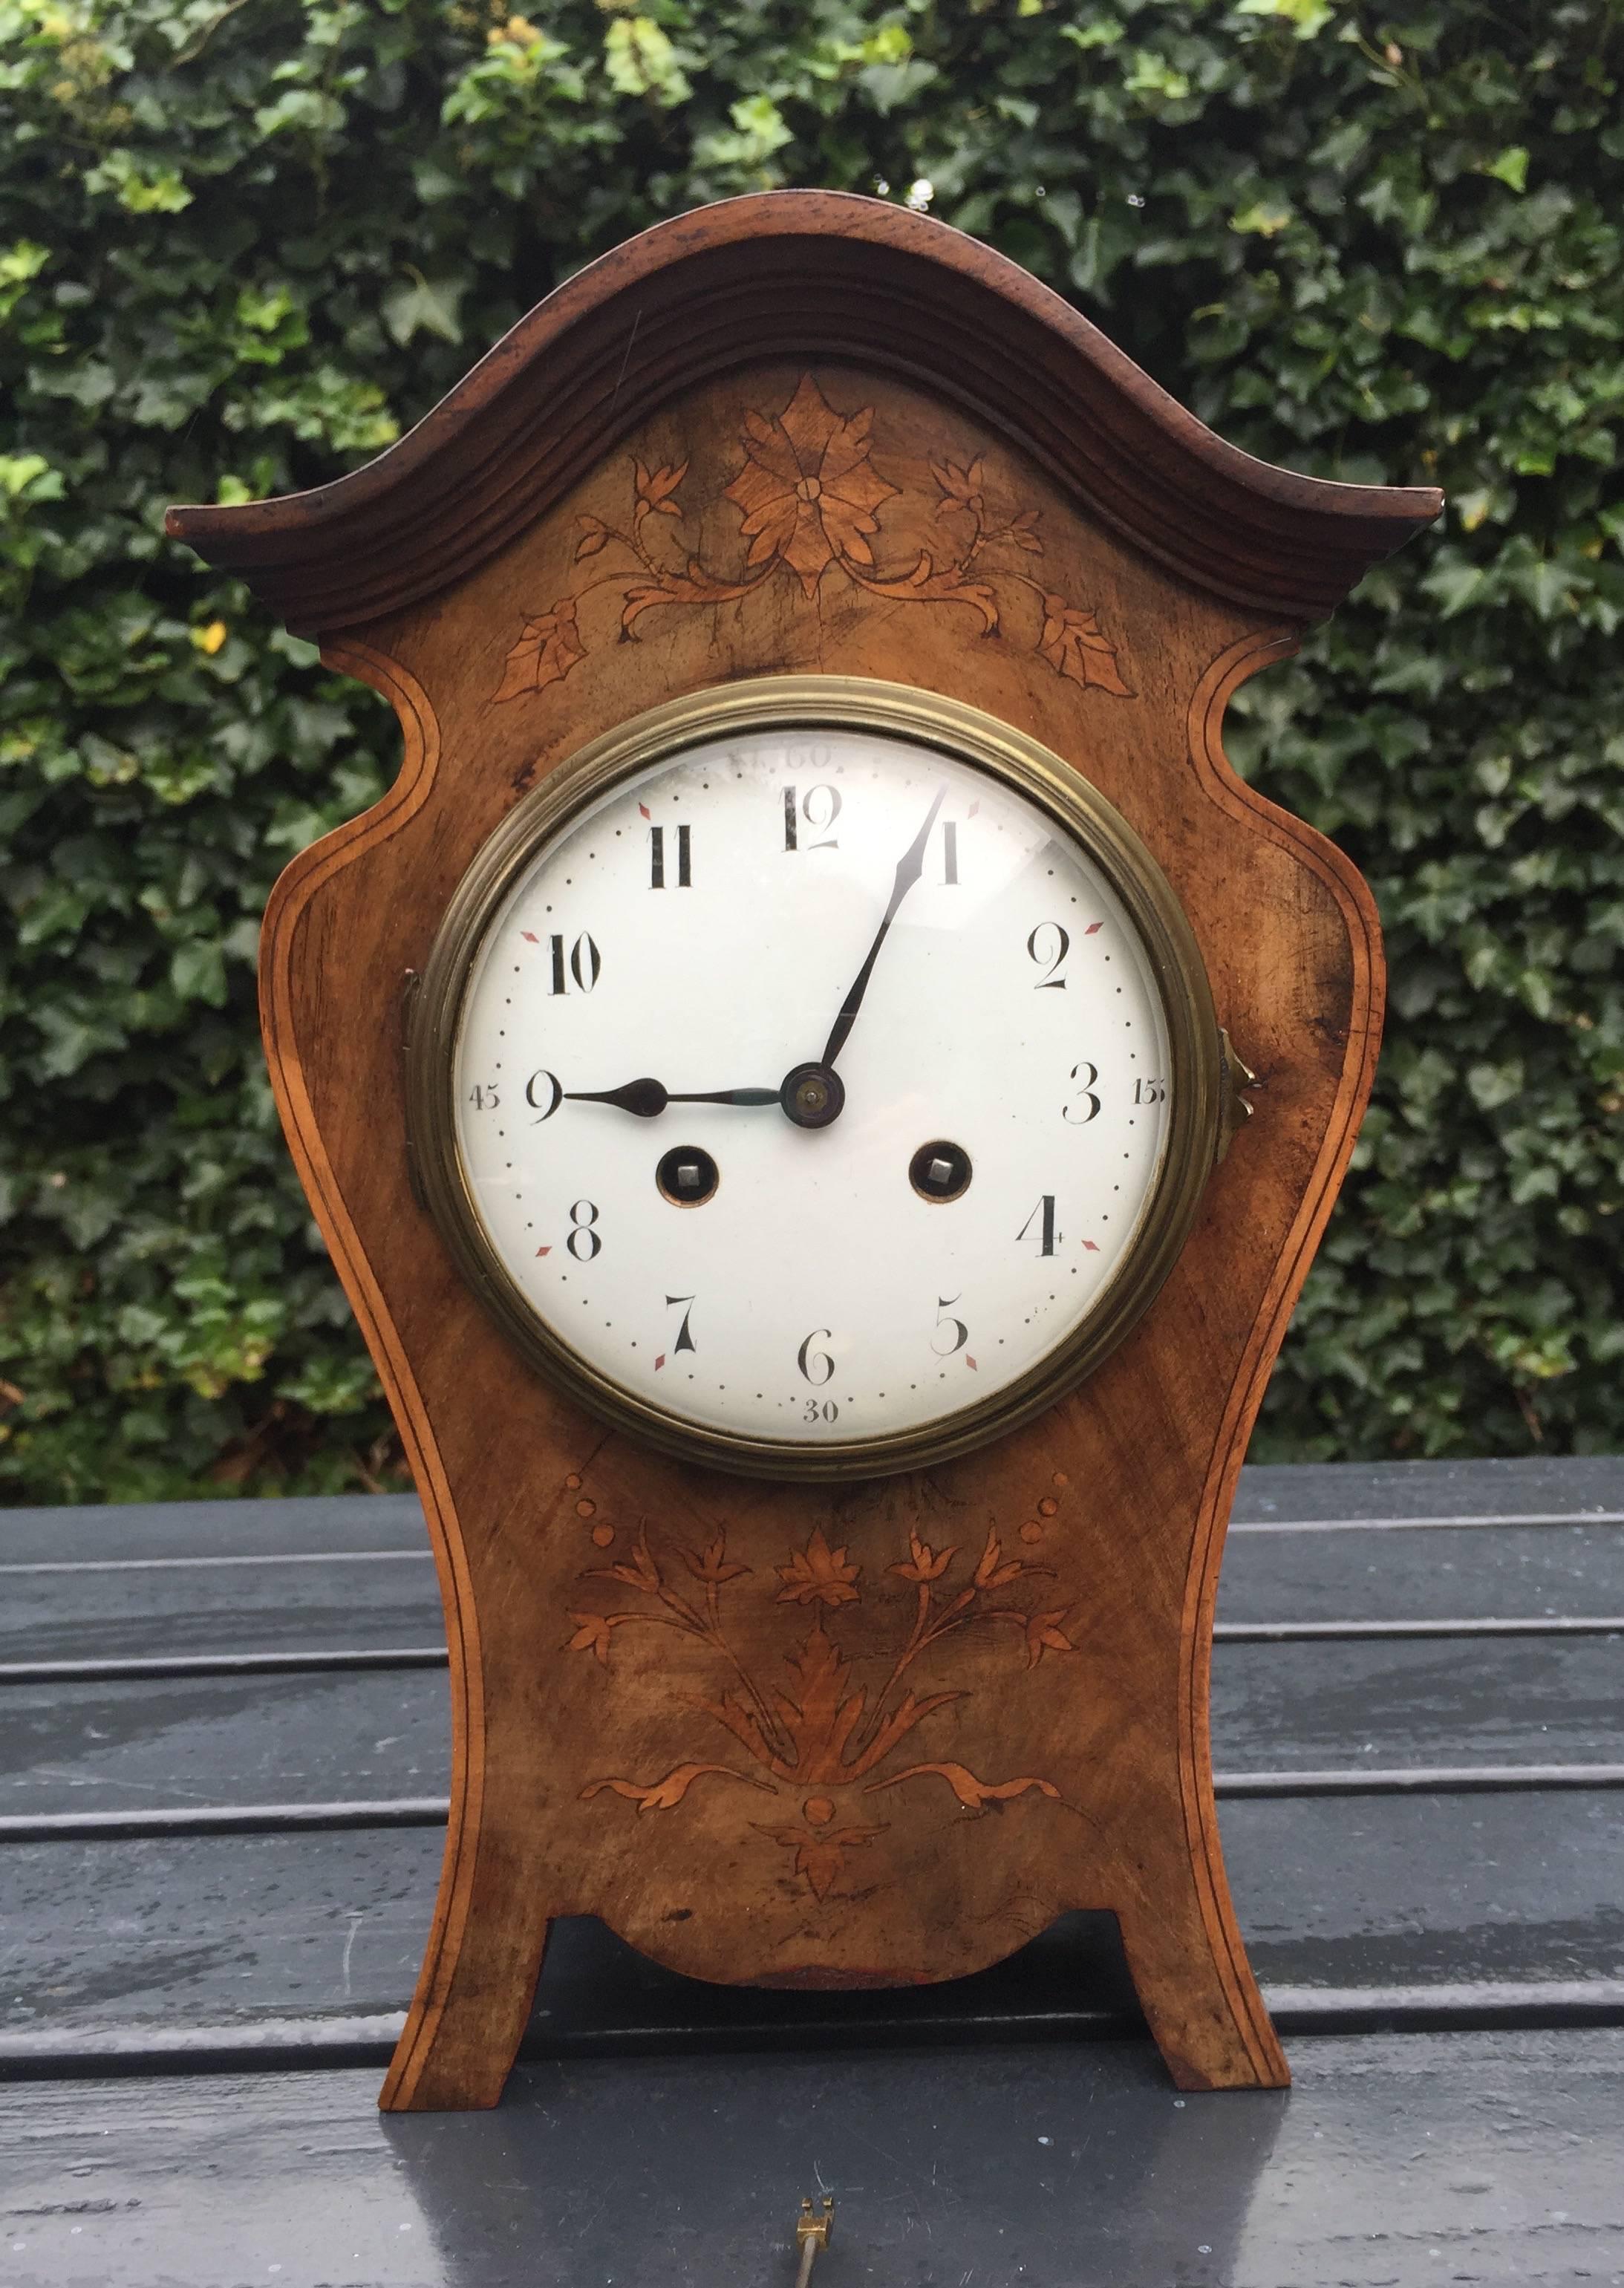 Stylish Art Nouveau clock in good working order. 

This stunning Art Nouveau clock has a beautiful patina and a clean and clear dial face with a curved glass door in front. This Fine mantel clock has wonderful, natural grain motifs of the quality